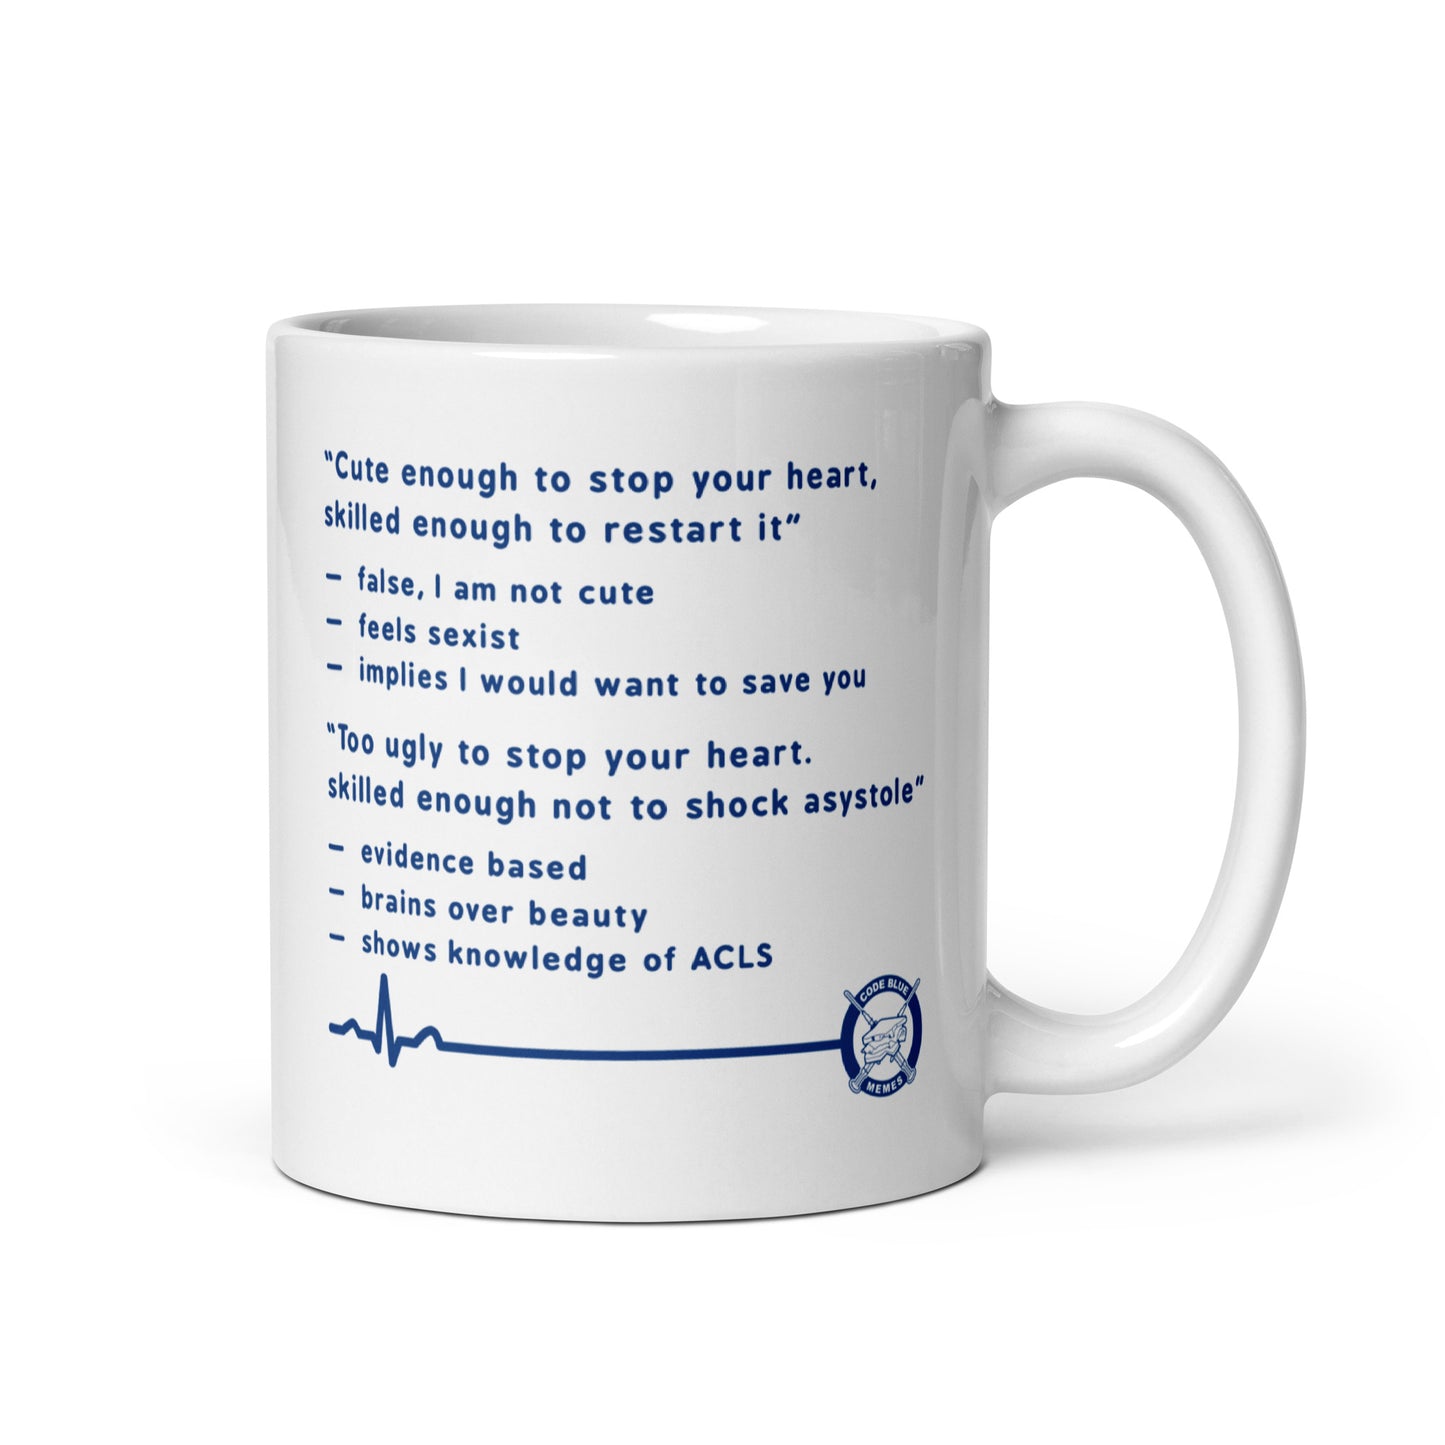 Too ugly to stop your heart (entire tweet) Mug